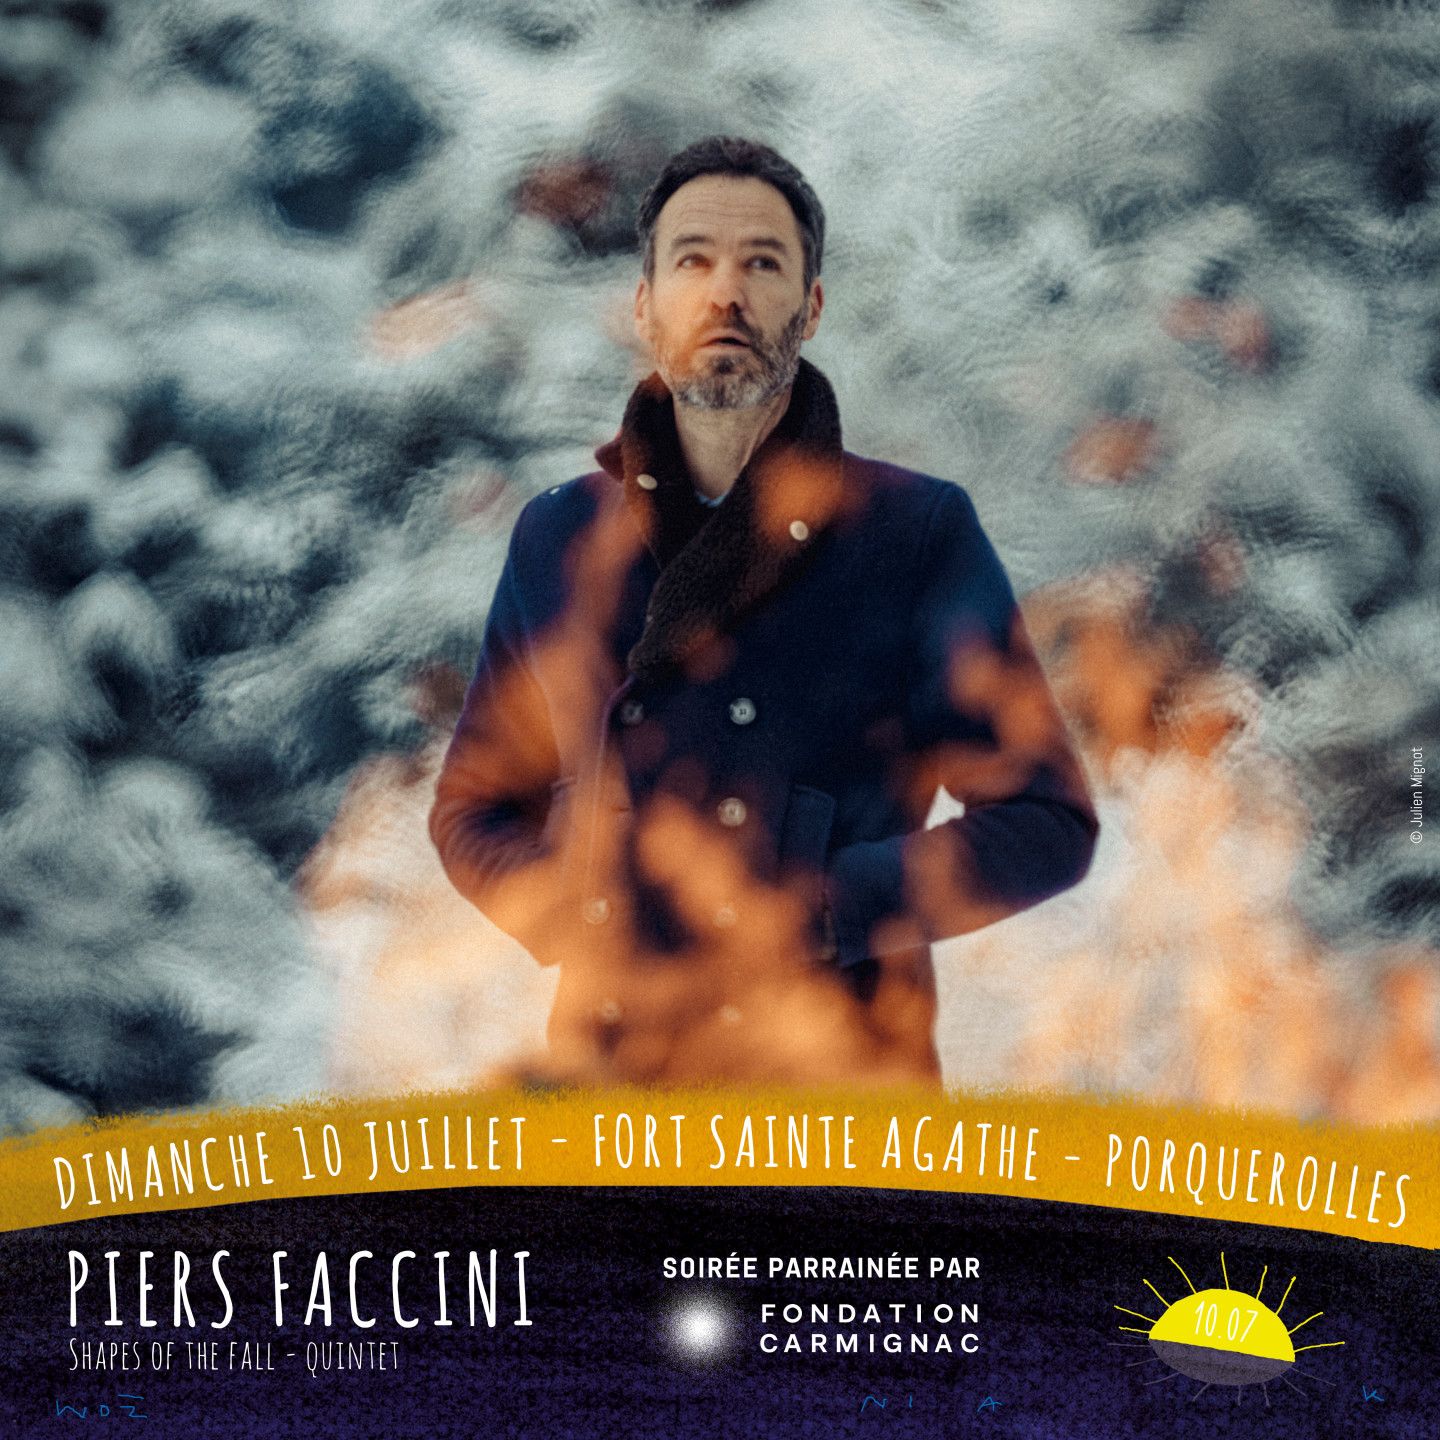 Piers Faccini - Shapes of the fall